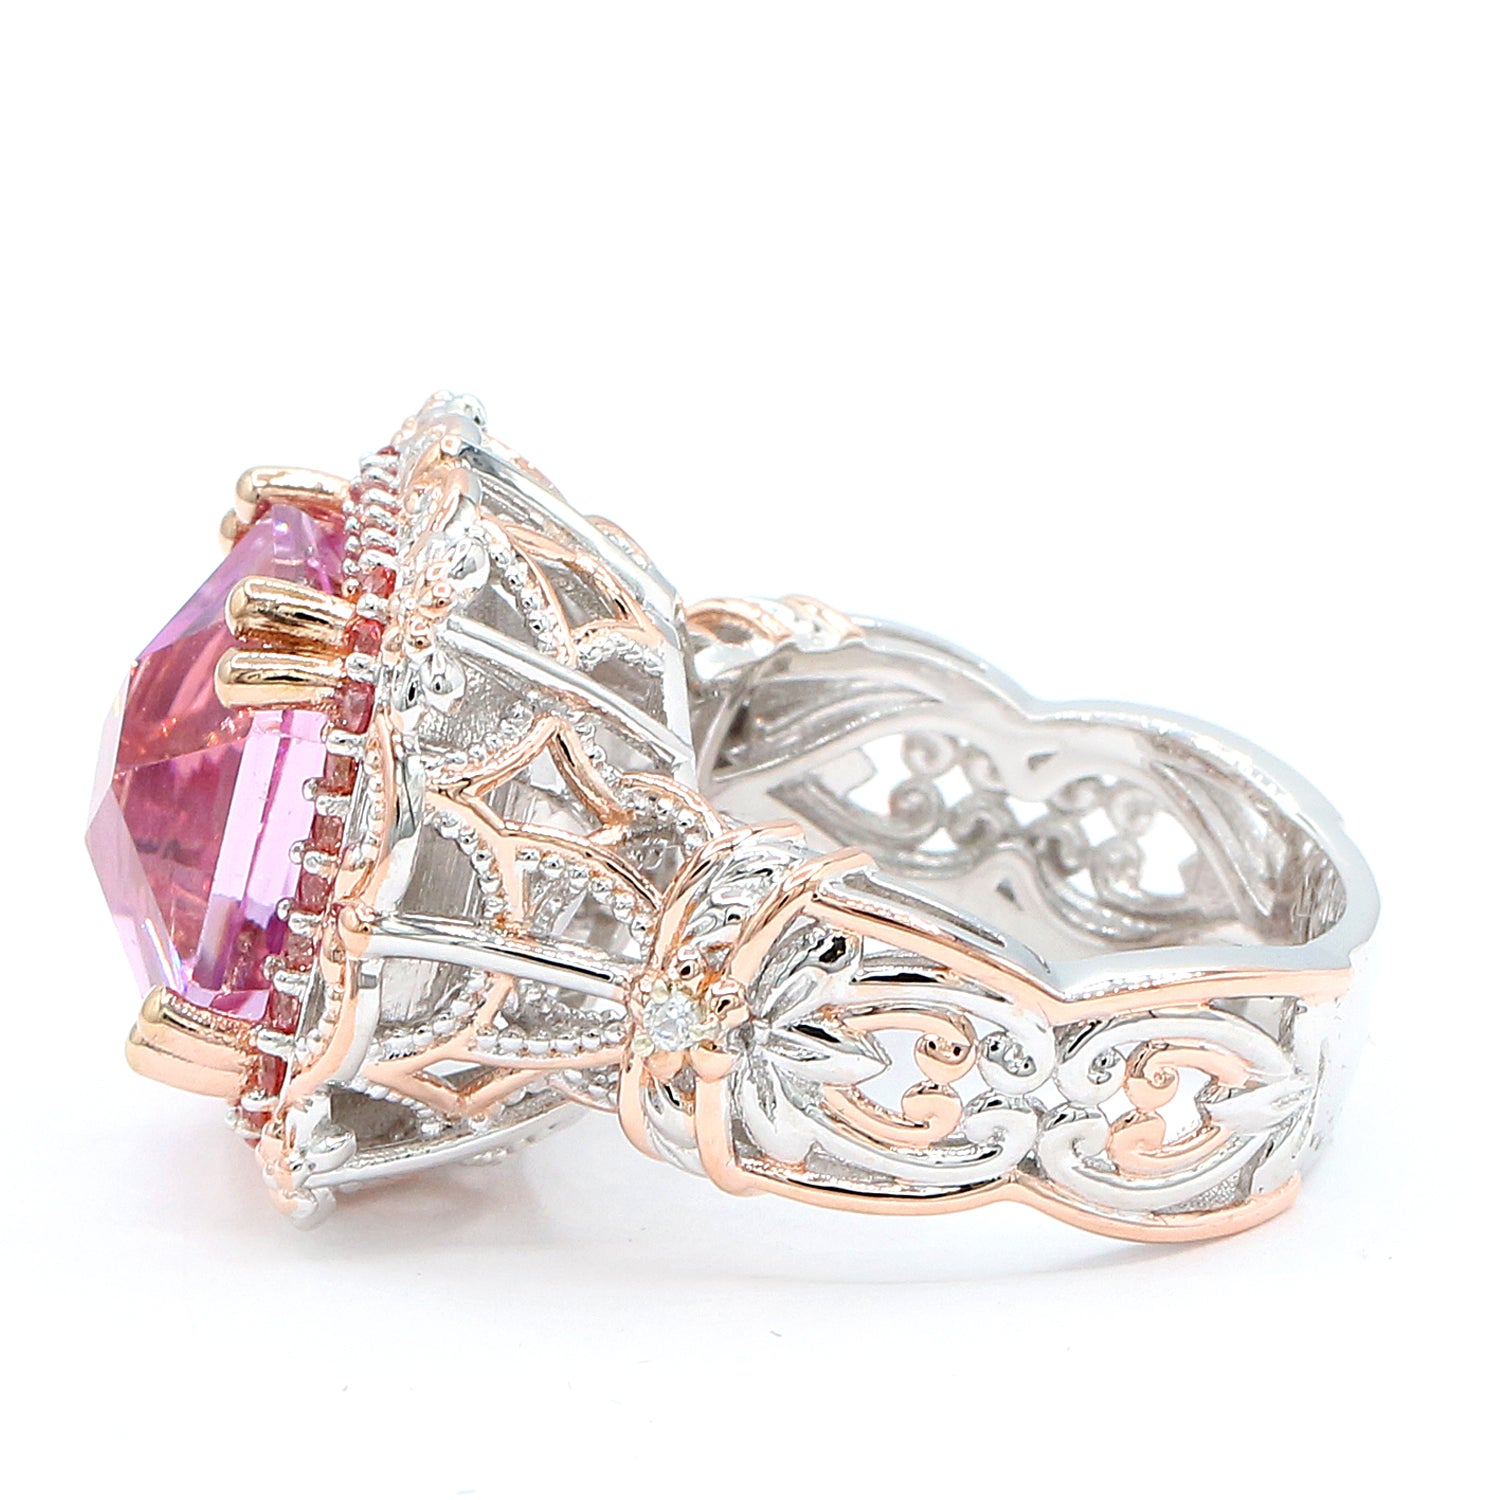 Limited Edition Gems en Vogue Luxe, One-of-a-Kind 13.91ctw Kunzite, Padparadscha Sapphire & White Zircon Ring